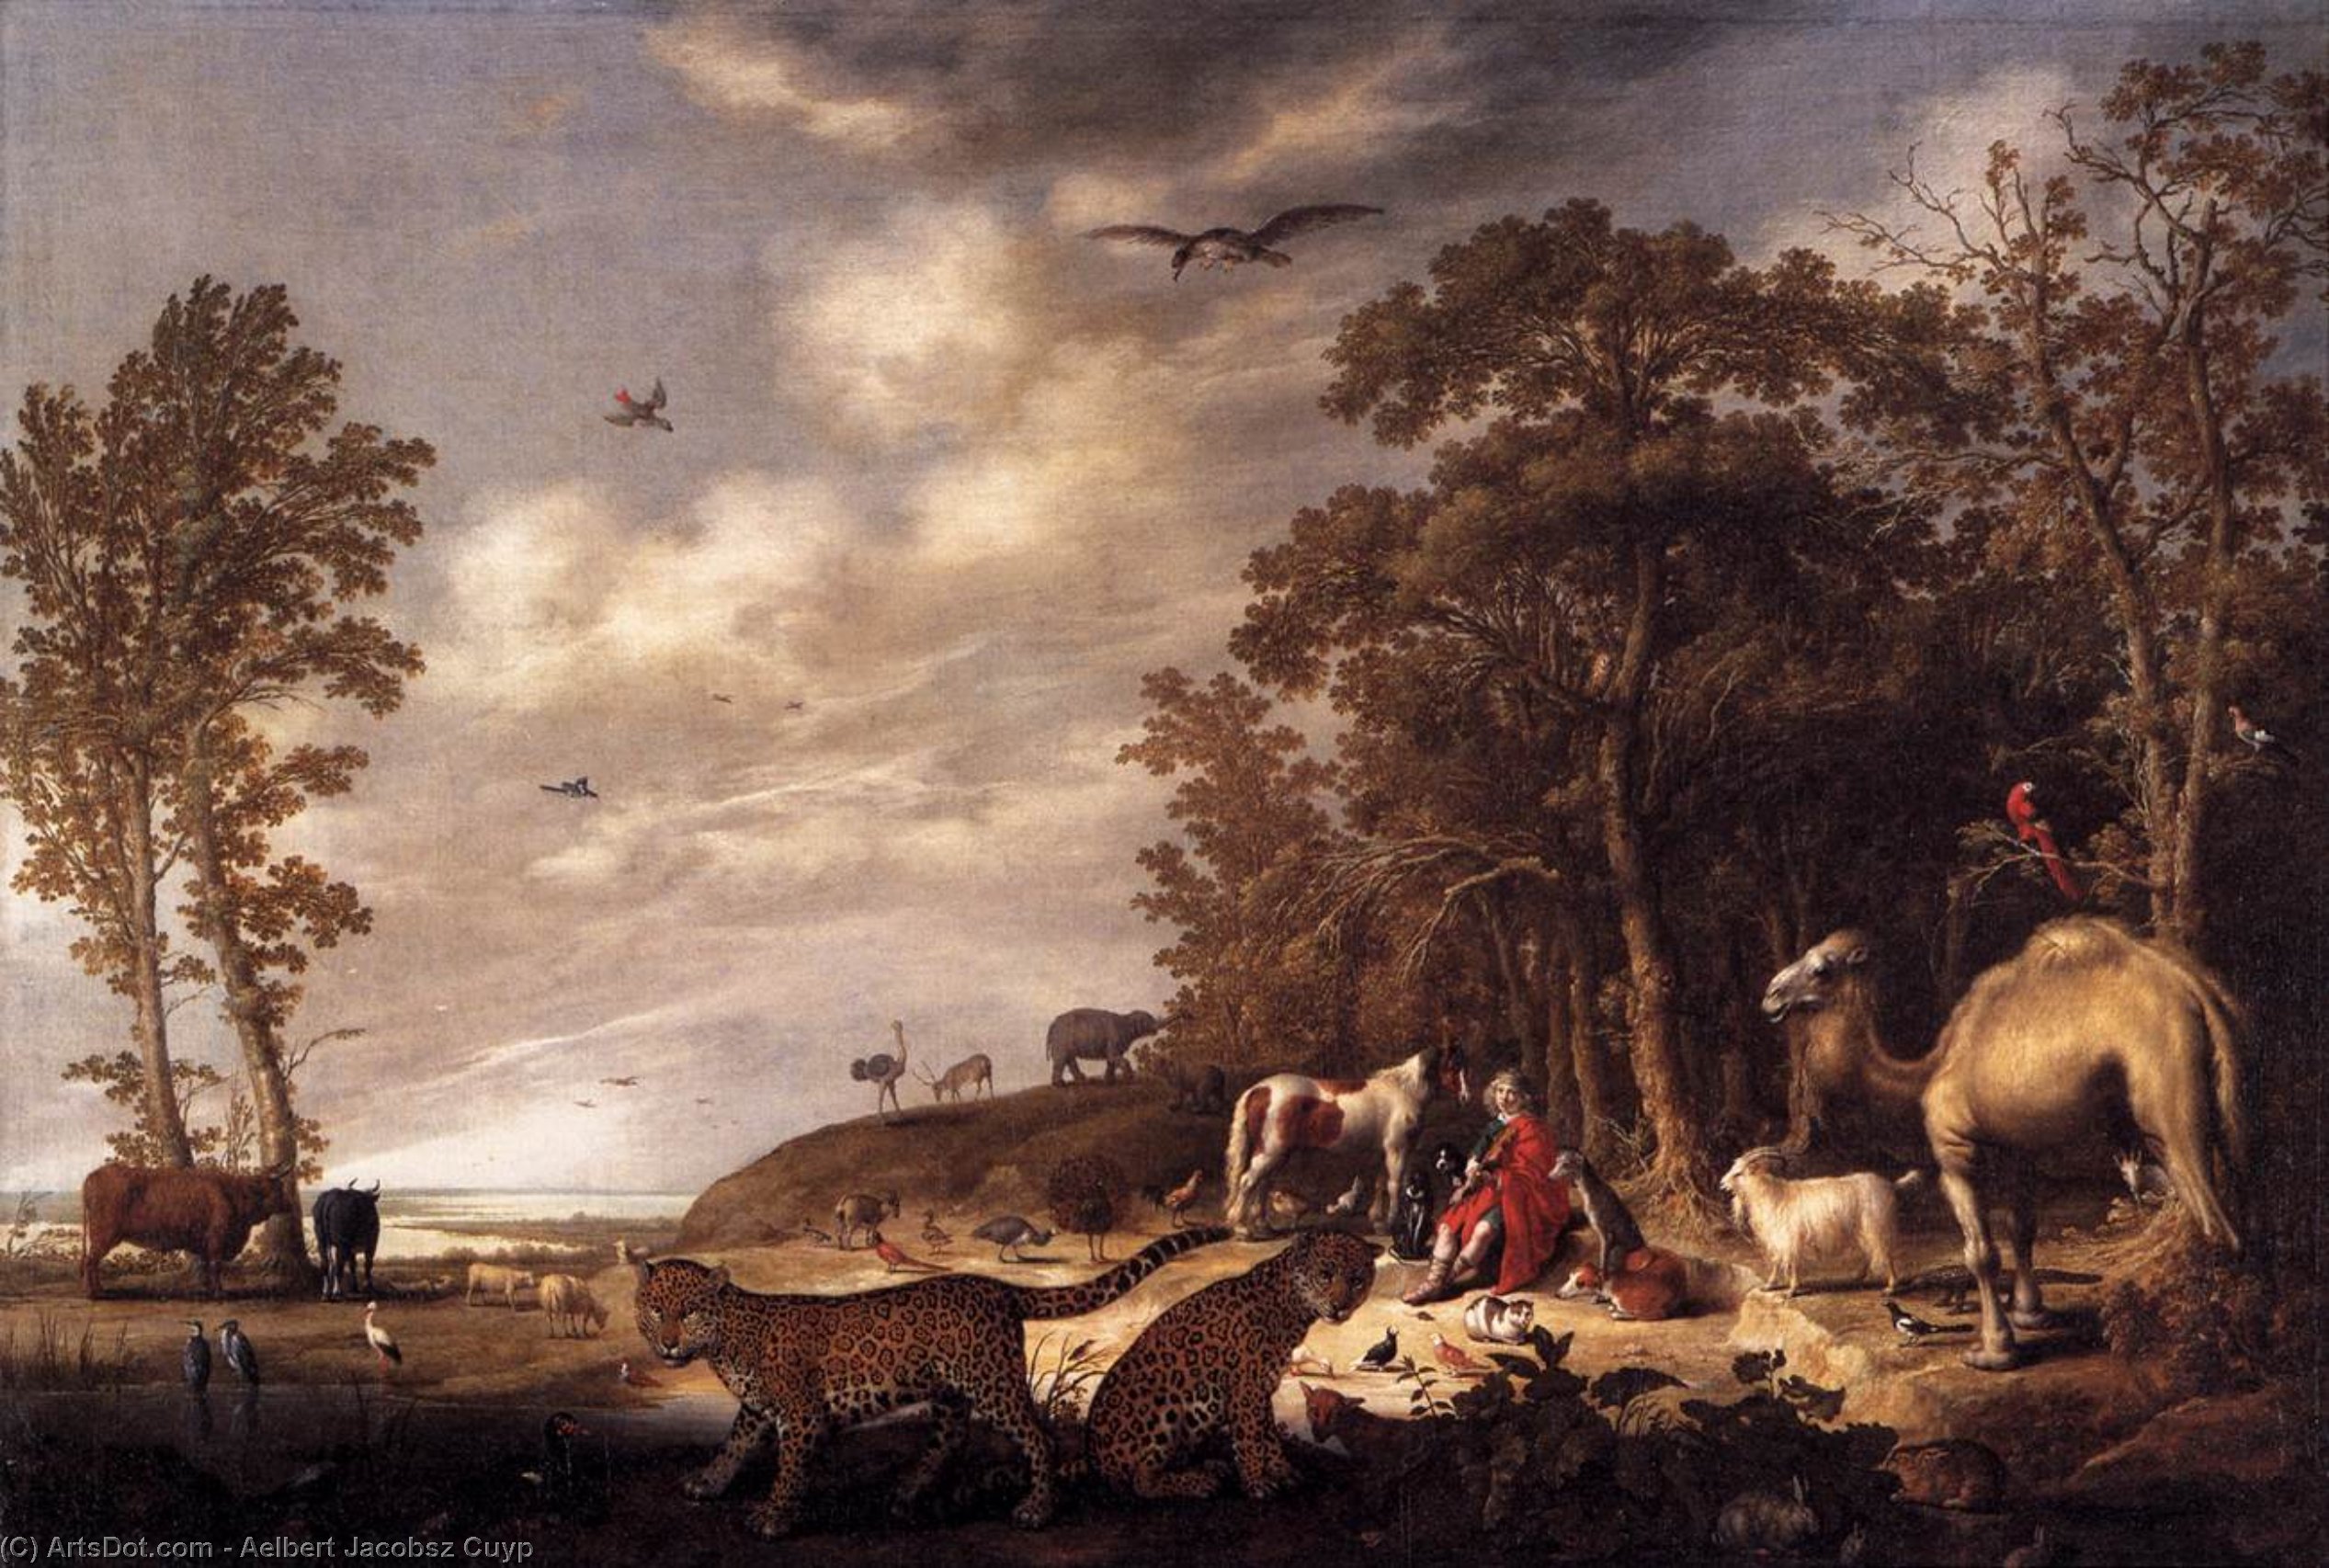 Wikioo.org - สารานุกรมวิจิตรศิลป์ - จิตรกรรม Aelbert Jacobsz Cuyp - Orpheus with Animals in a Landscape